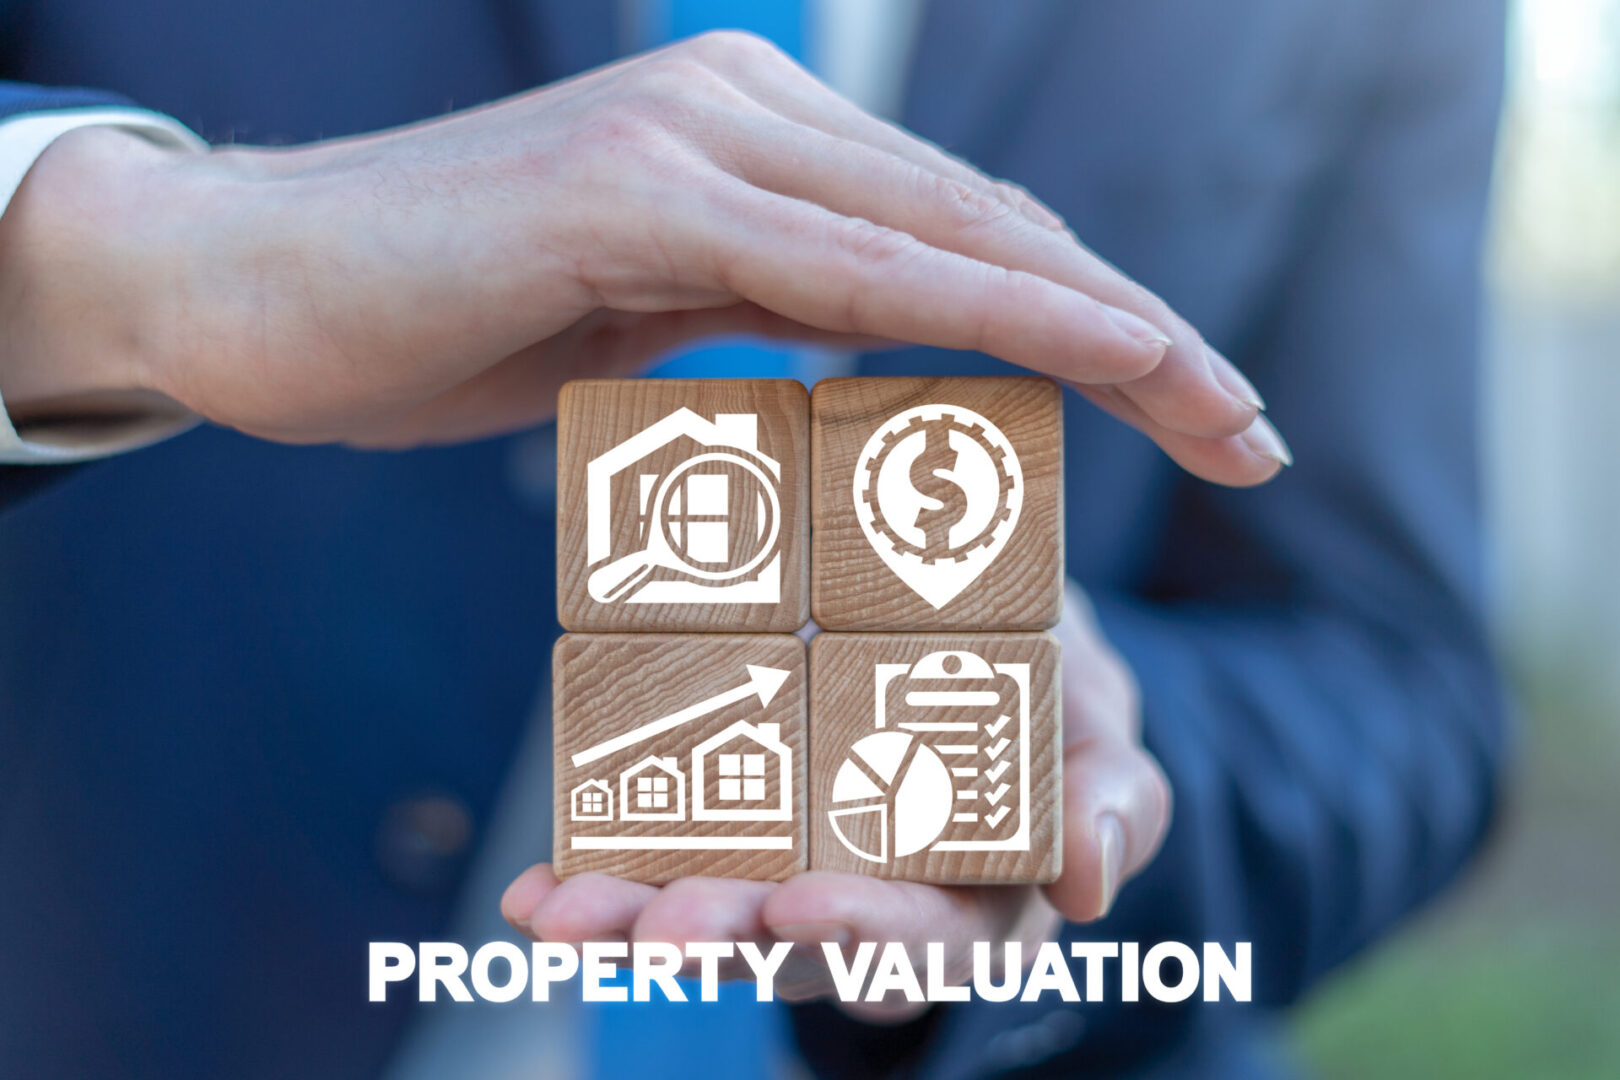 A person holding out their hands with the words property valuation written underneath them.